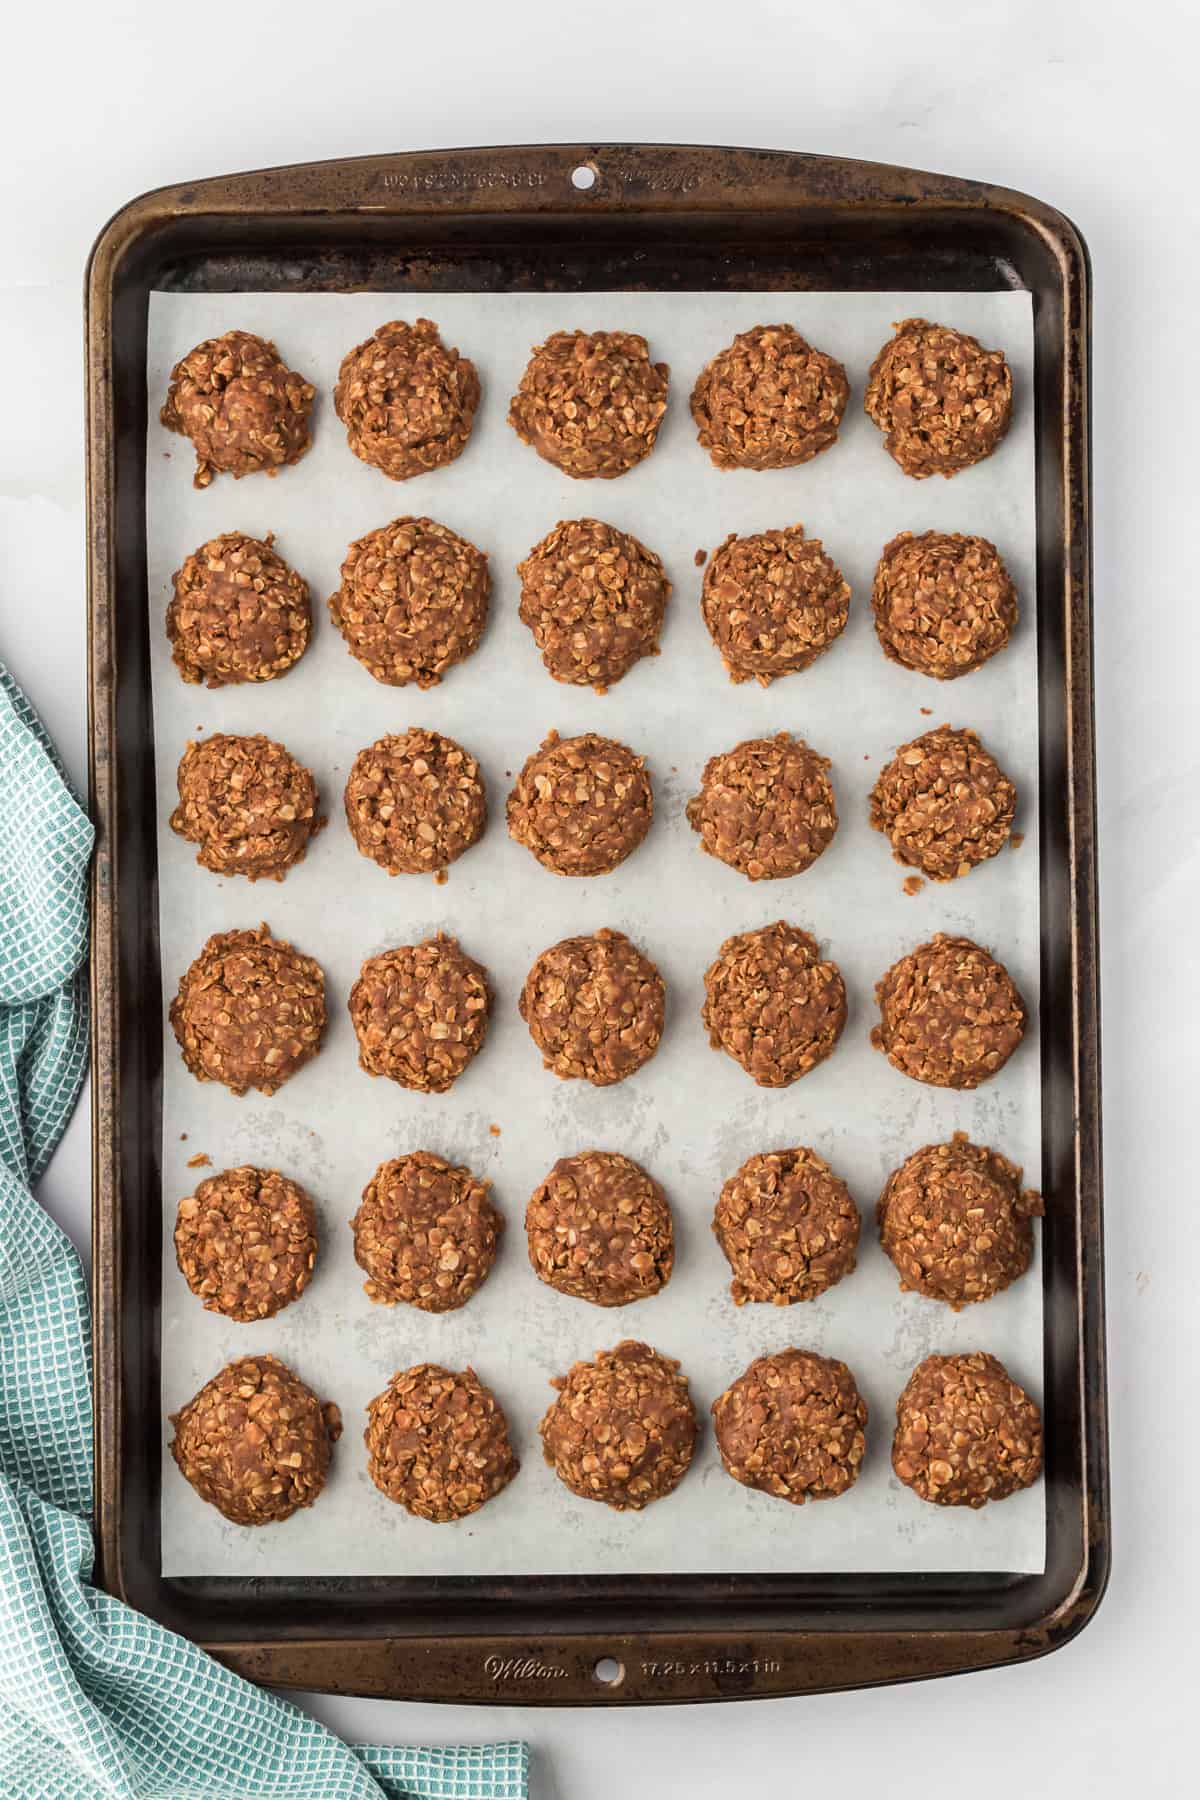 no bake cookies lined up filling up a baking sheet lined with parchment paper with a blue kitchen towel to the left of it